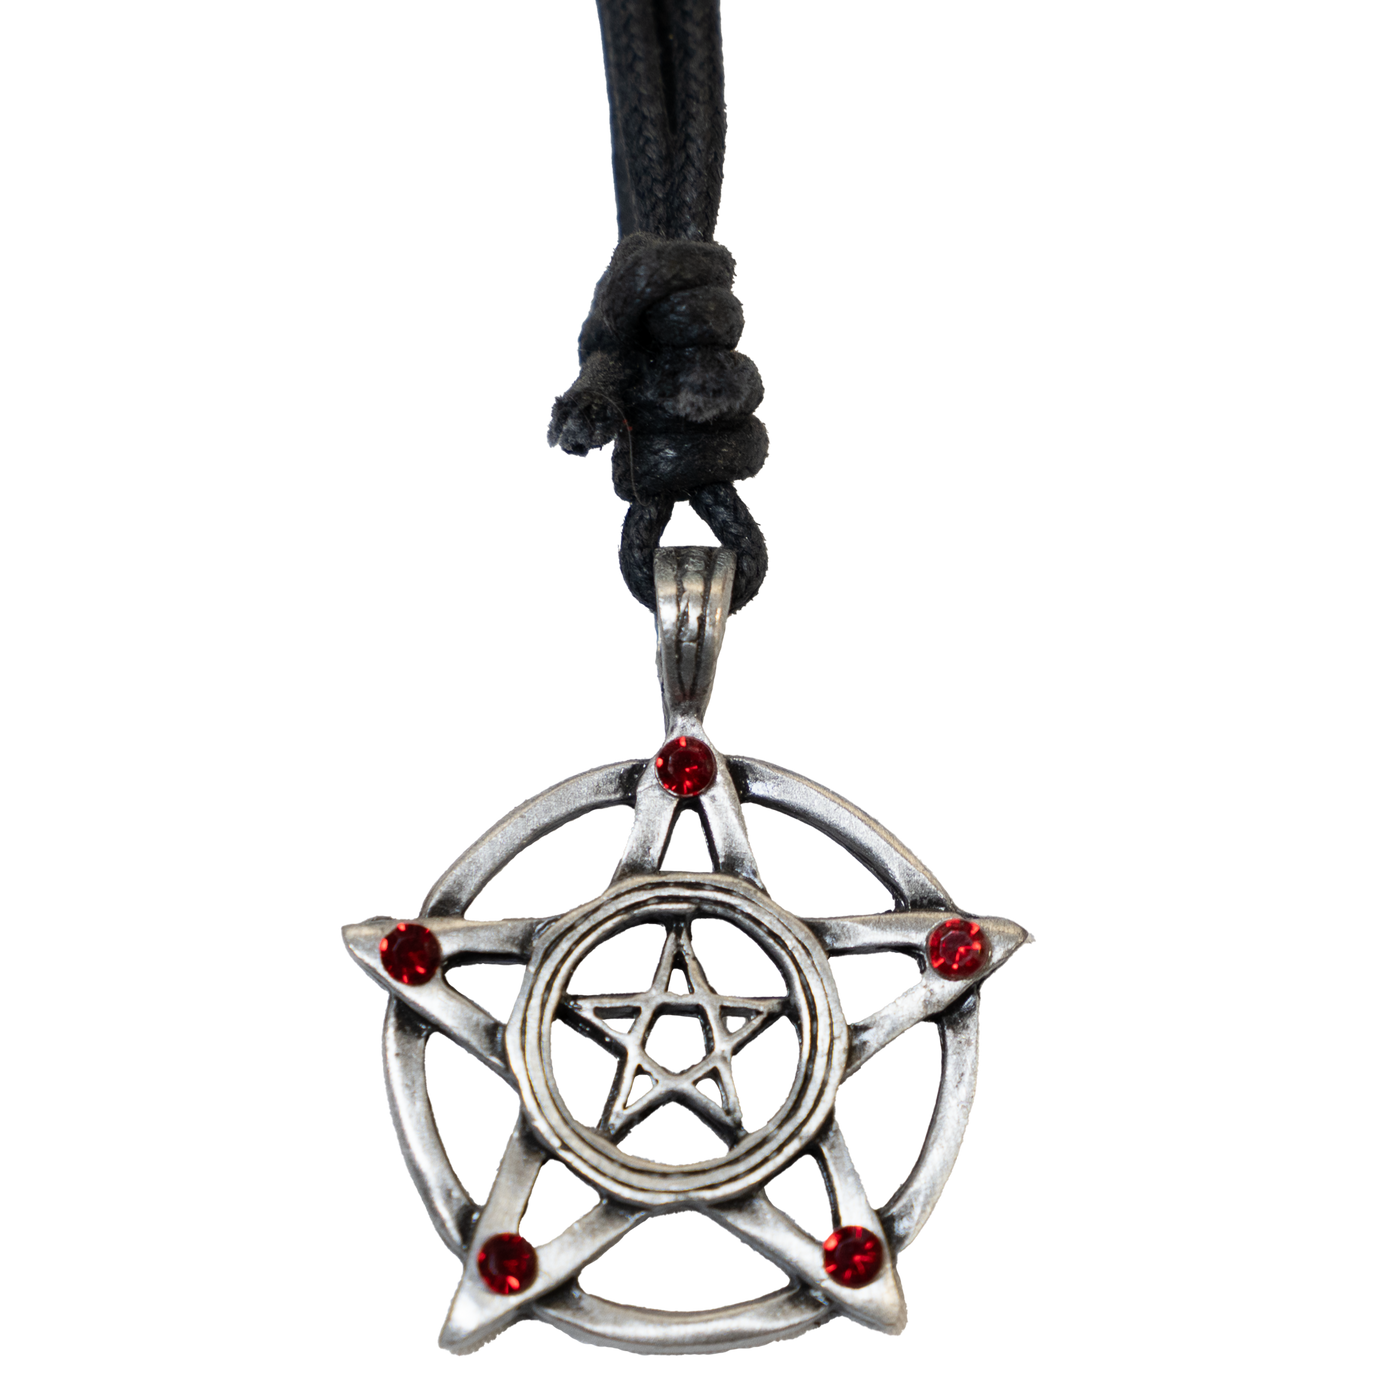 pentagram pendant made in a pewter finish it has a circle around the pentagram with a pentagram in the centre.  a red stone is set at each of the outside points